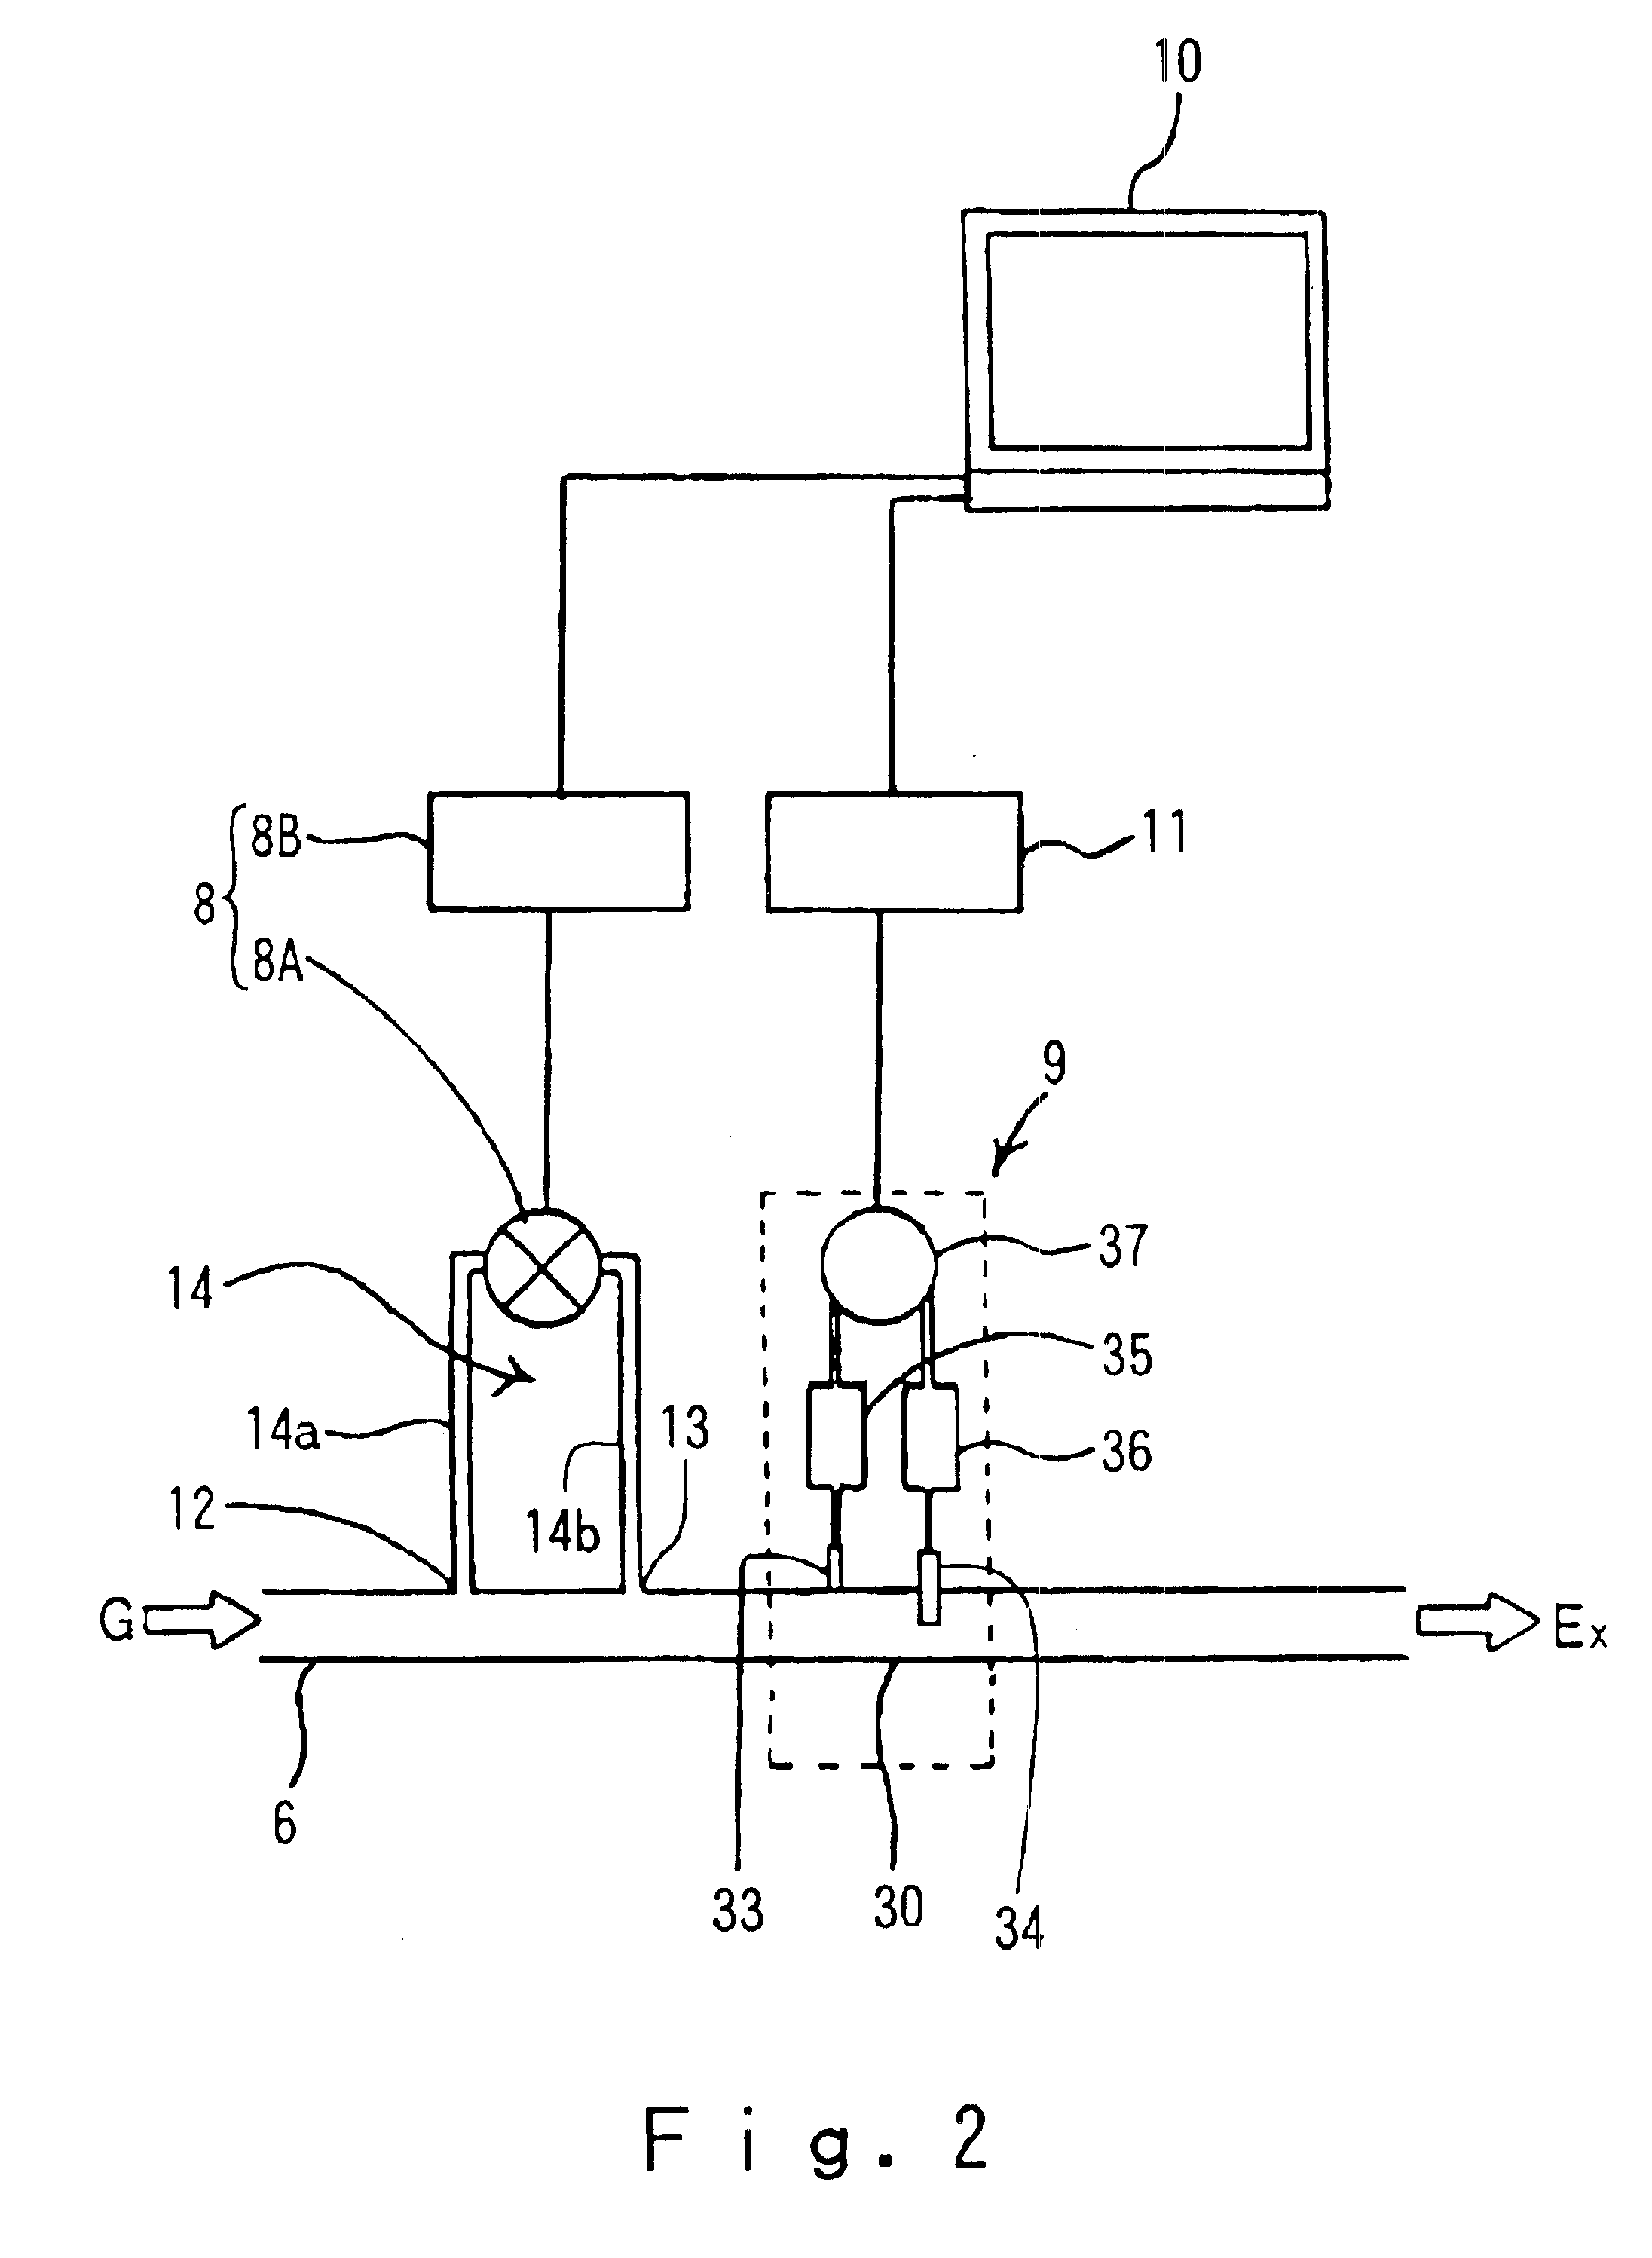 Vehicle-installed exhaust gas analyzing apparatus